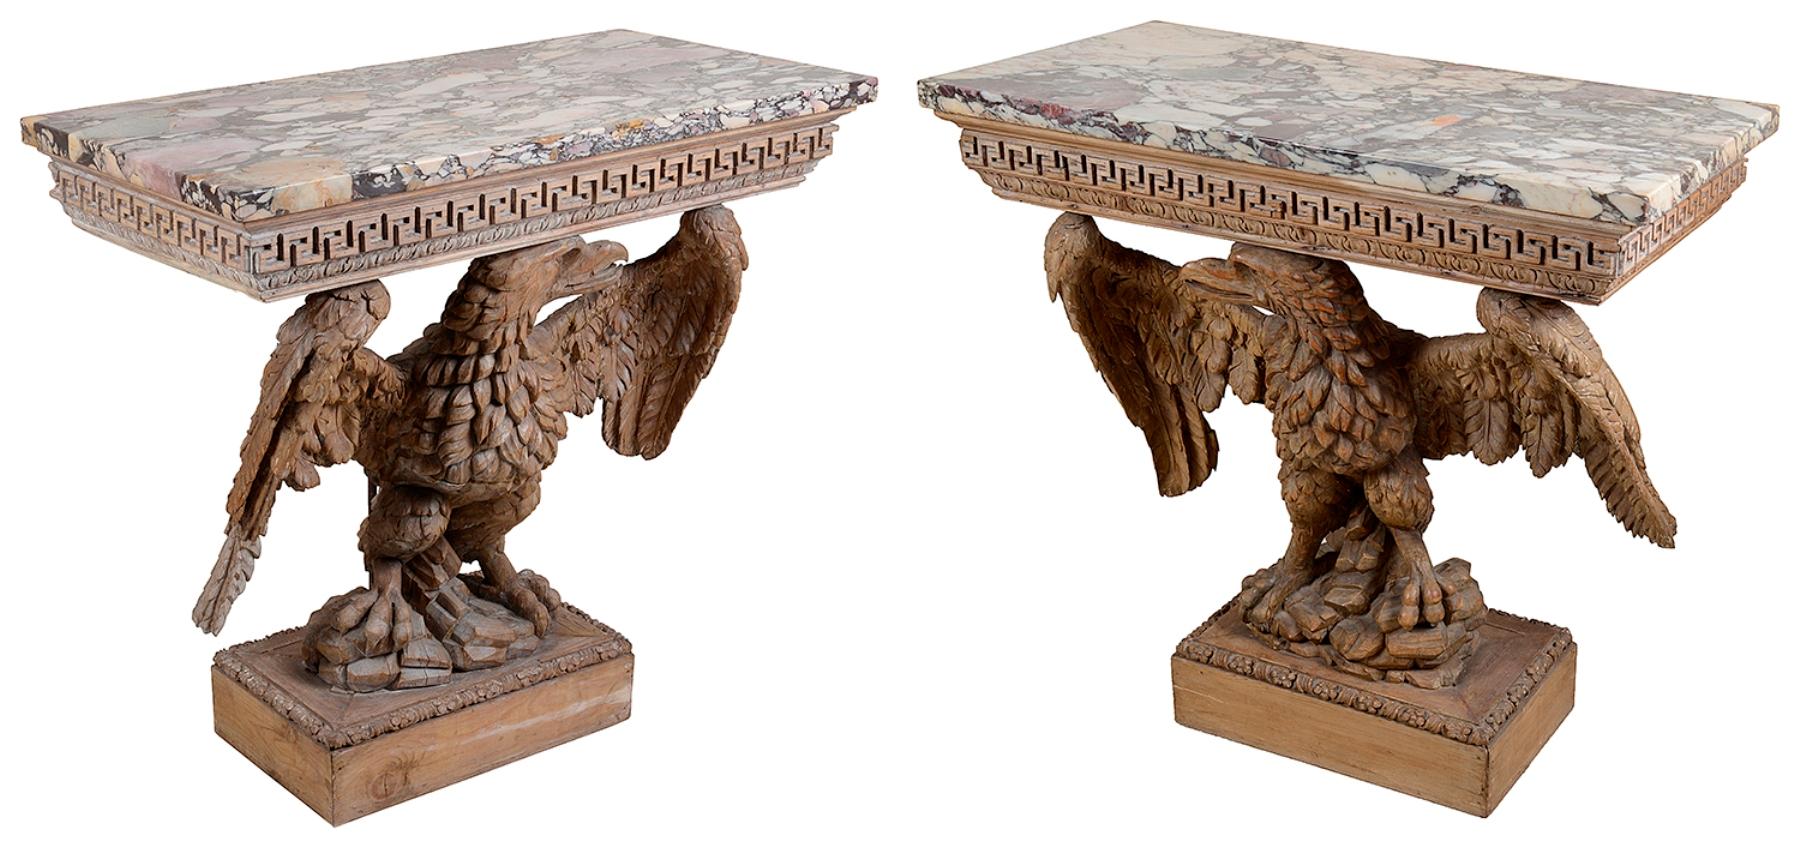 A wonderful pair of Regency period carved pine console tables, with Breccia marble tops supported by beautifully carved spreadwinged eagles standing on rockwork; on a plinth base with flowerhead moulded edges.
In the manner of Francis Brodie of